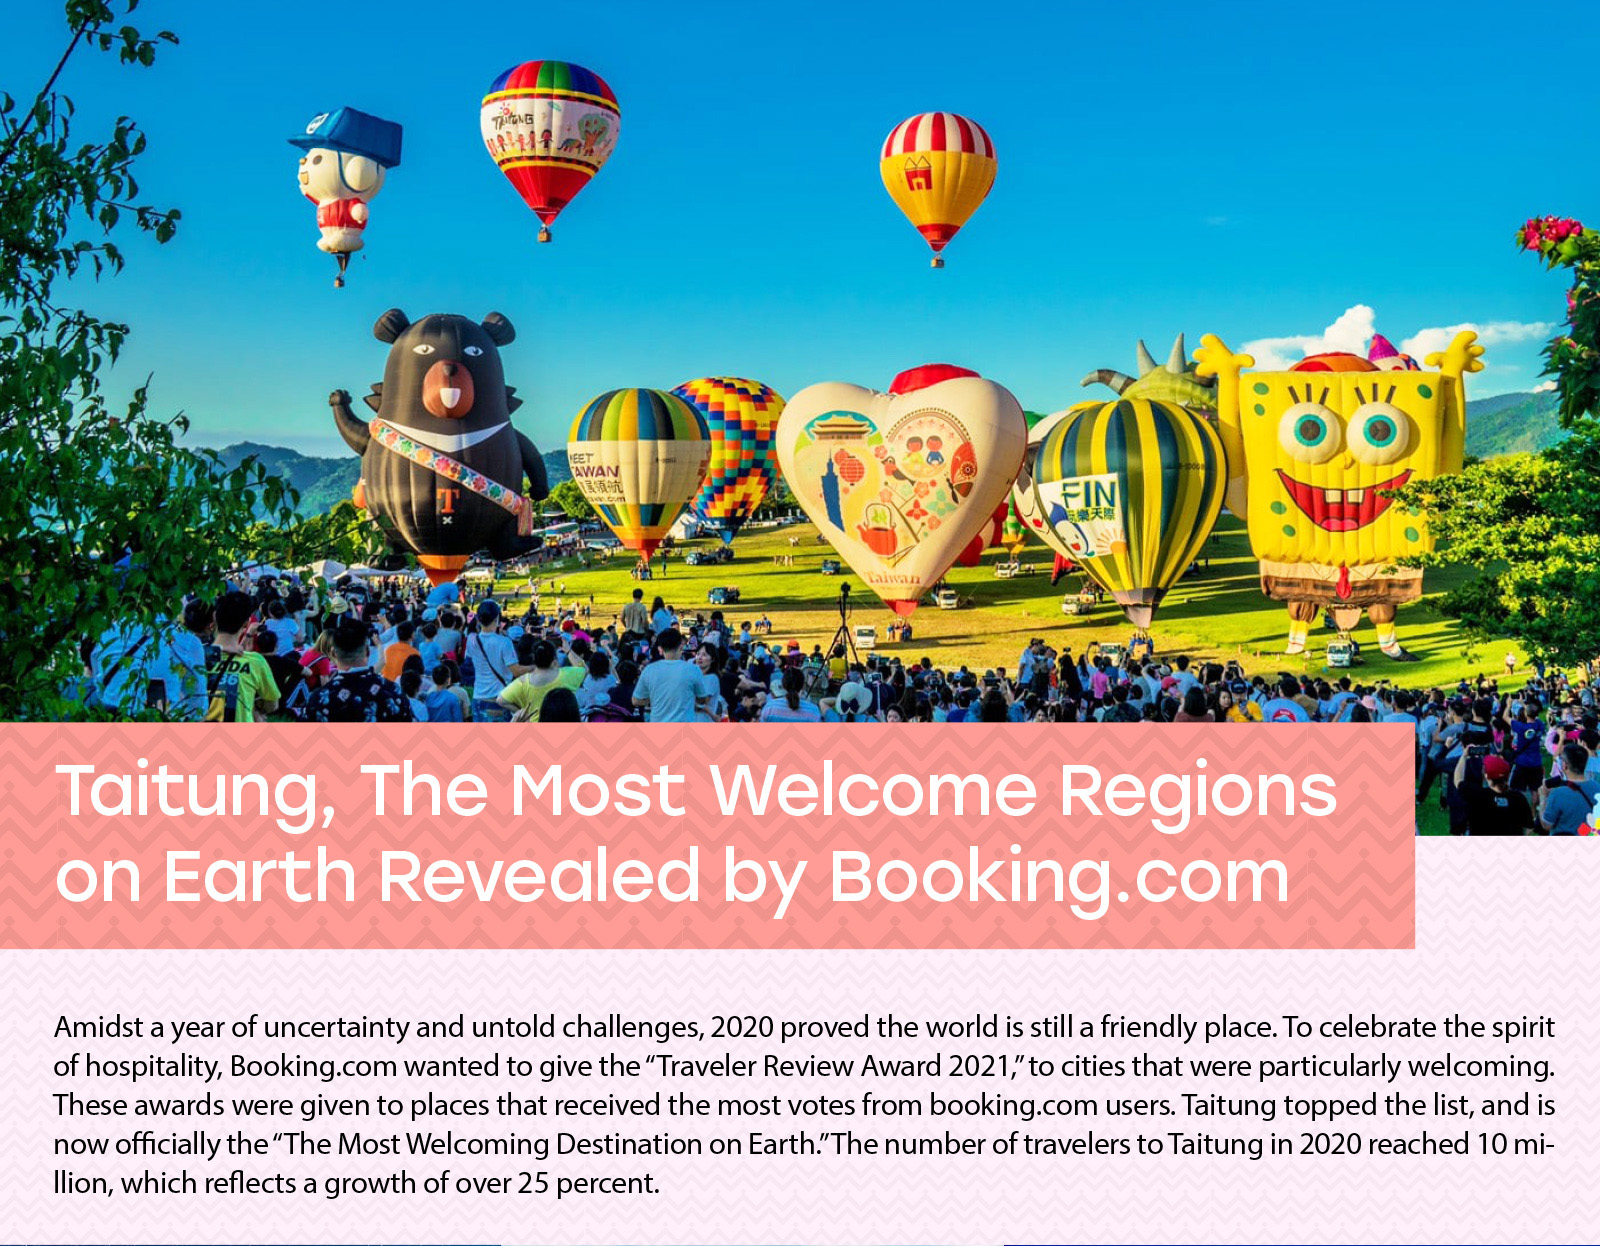 Taitung, The Most Welcome Regions on Earth Revealed by Booking.com Amidst a year of uncertainty and untold challenges, 2020 proved the world is still a friendly place. To celebrate the spirit of hospitality, Booking.com wanted to give the “Traveler Review Award 2021,” to cities that were particularly welcoming. These awards were given to places that received the most votes from booking.com users. Taitung topped the list, and is now officially the “The Most Welcoming Destination on Earth.” The number of travelers to Taitung in 2020 reached 10 million, which reflects a growth of over 25 percent. 
”
